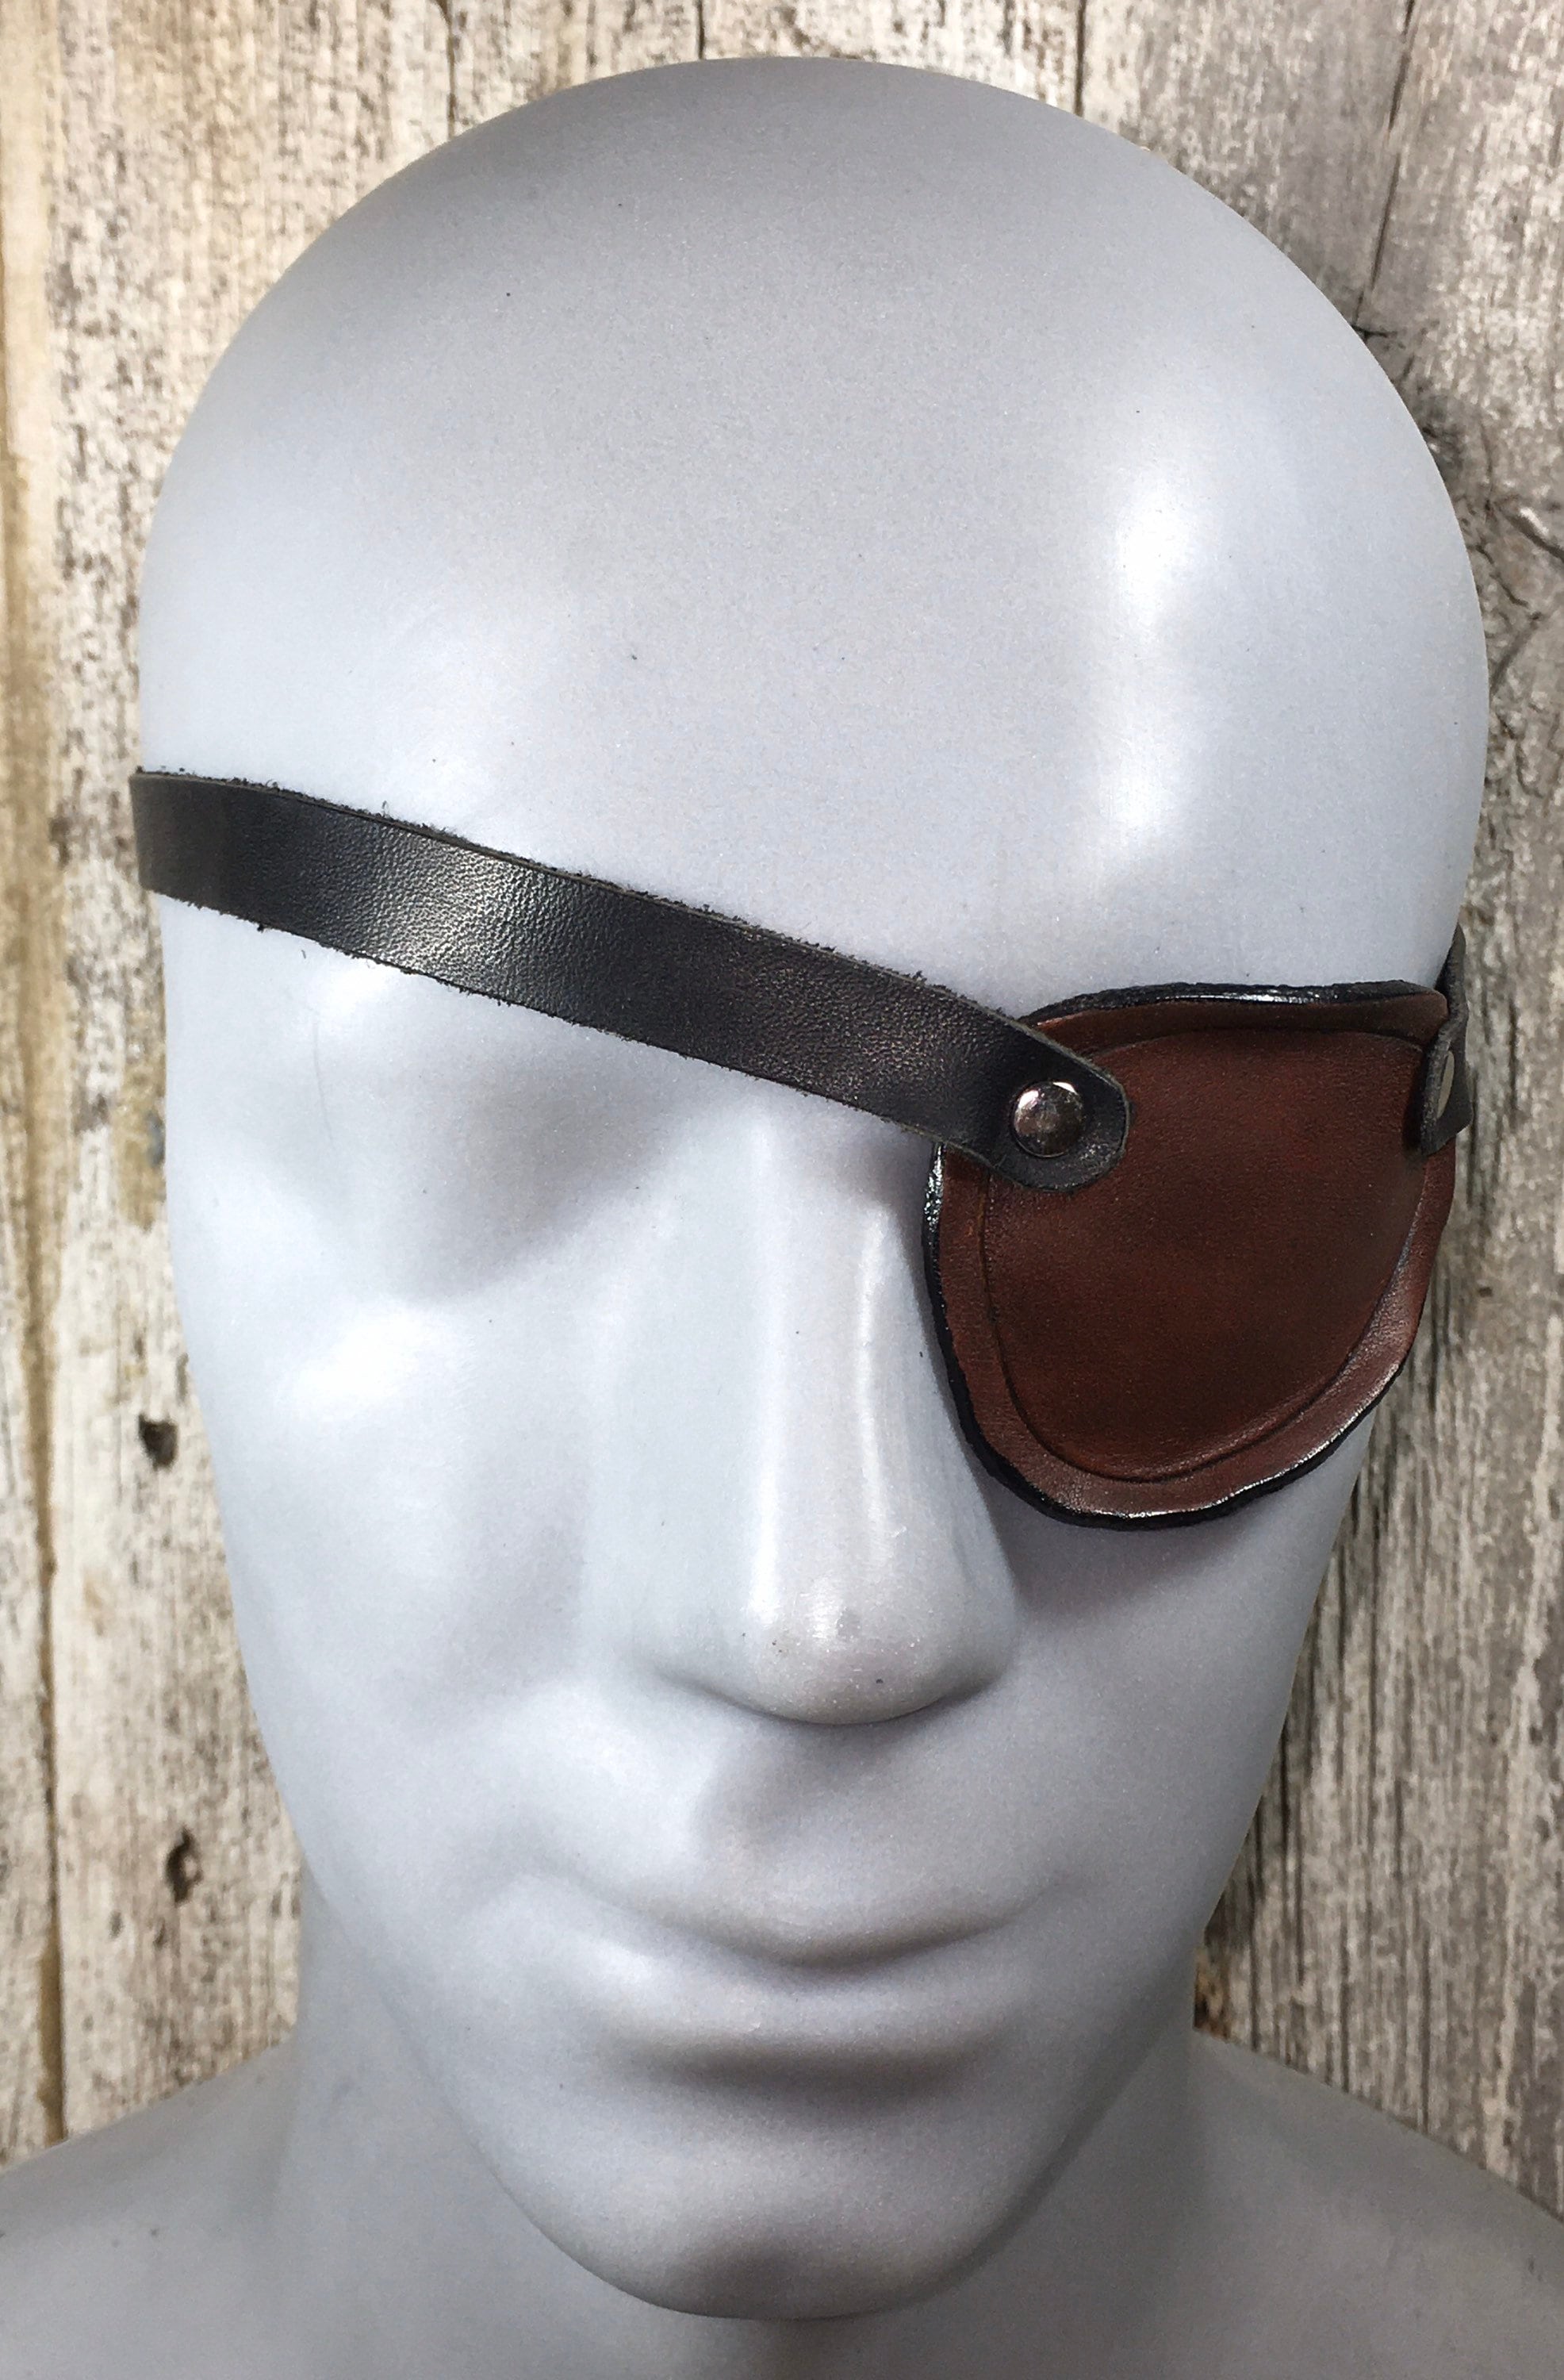 Leather molded Pirate eye patch